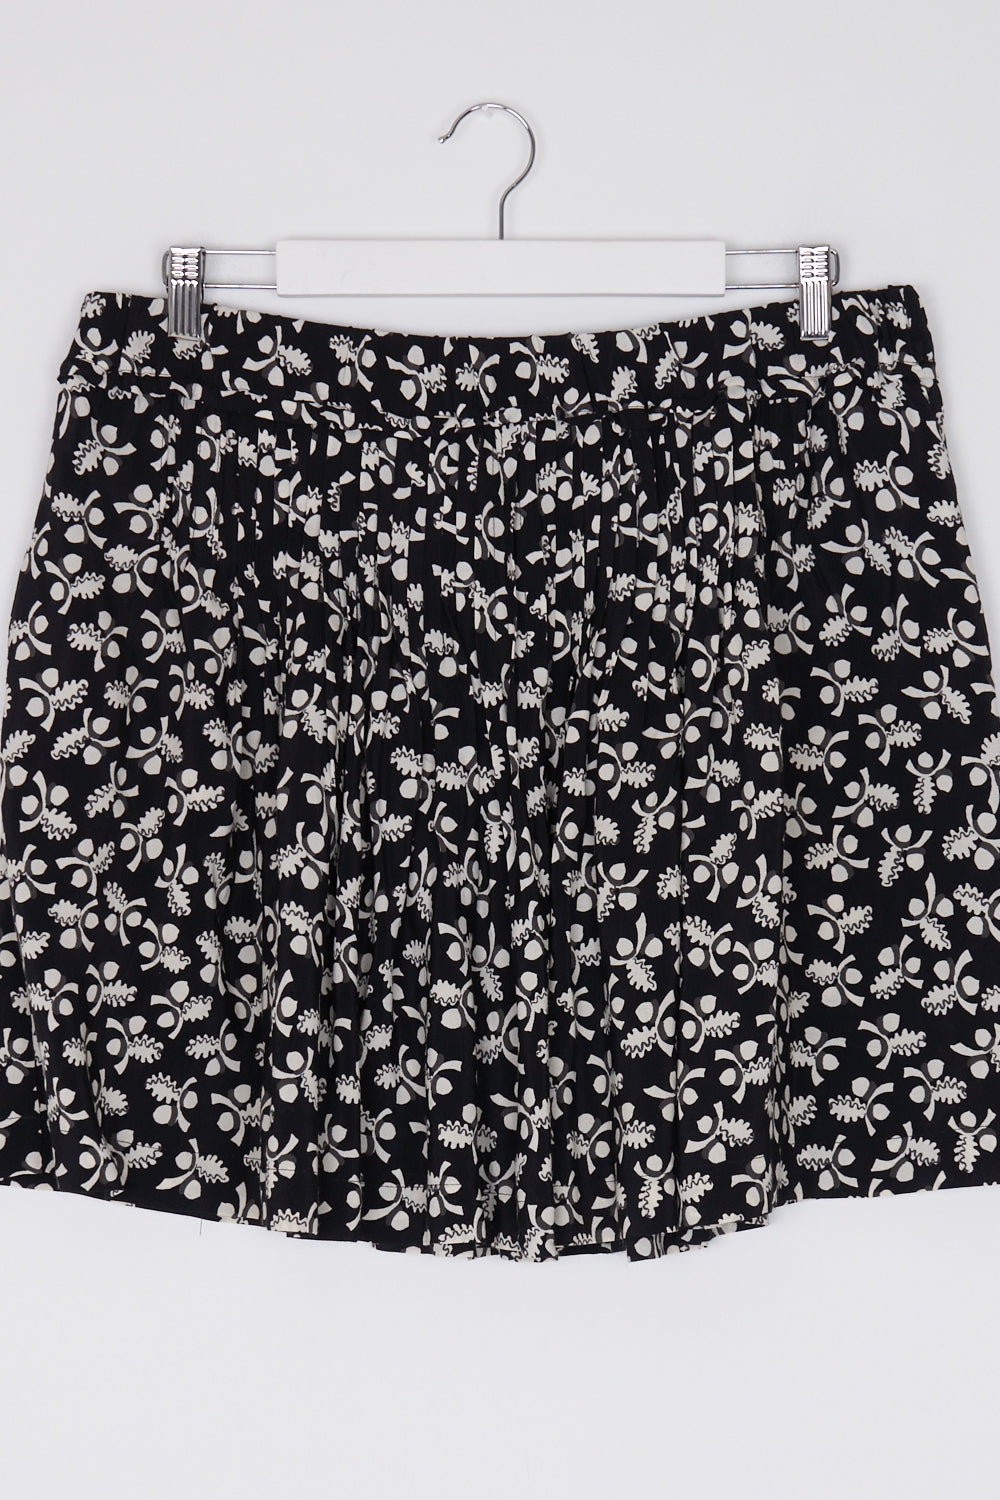 Country Road Black and White Patterned Skirt 16